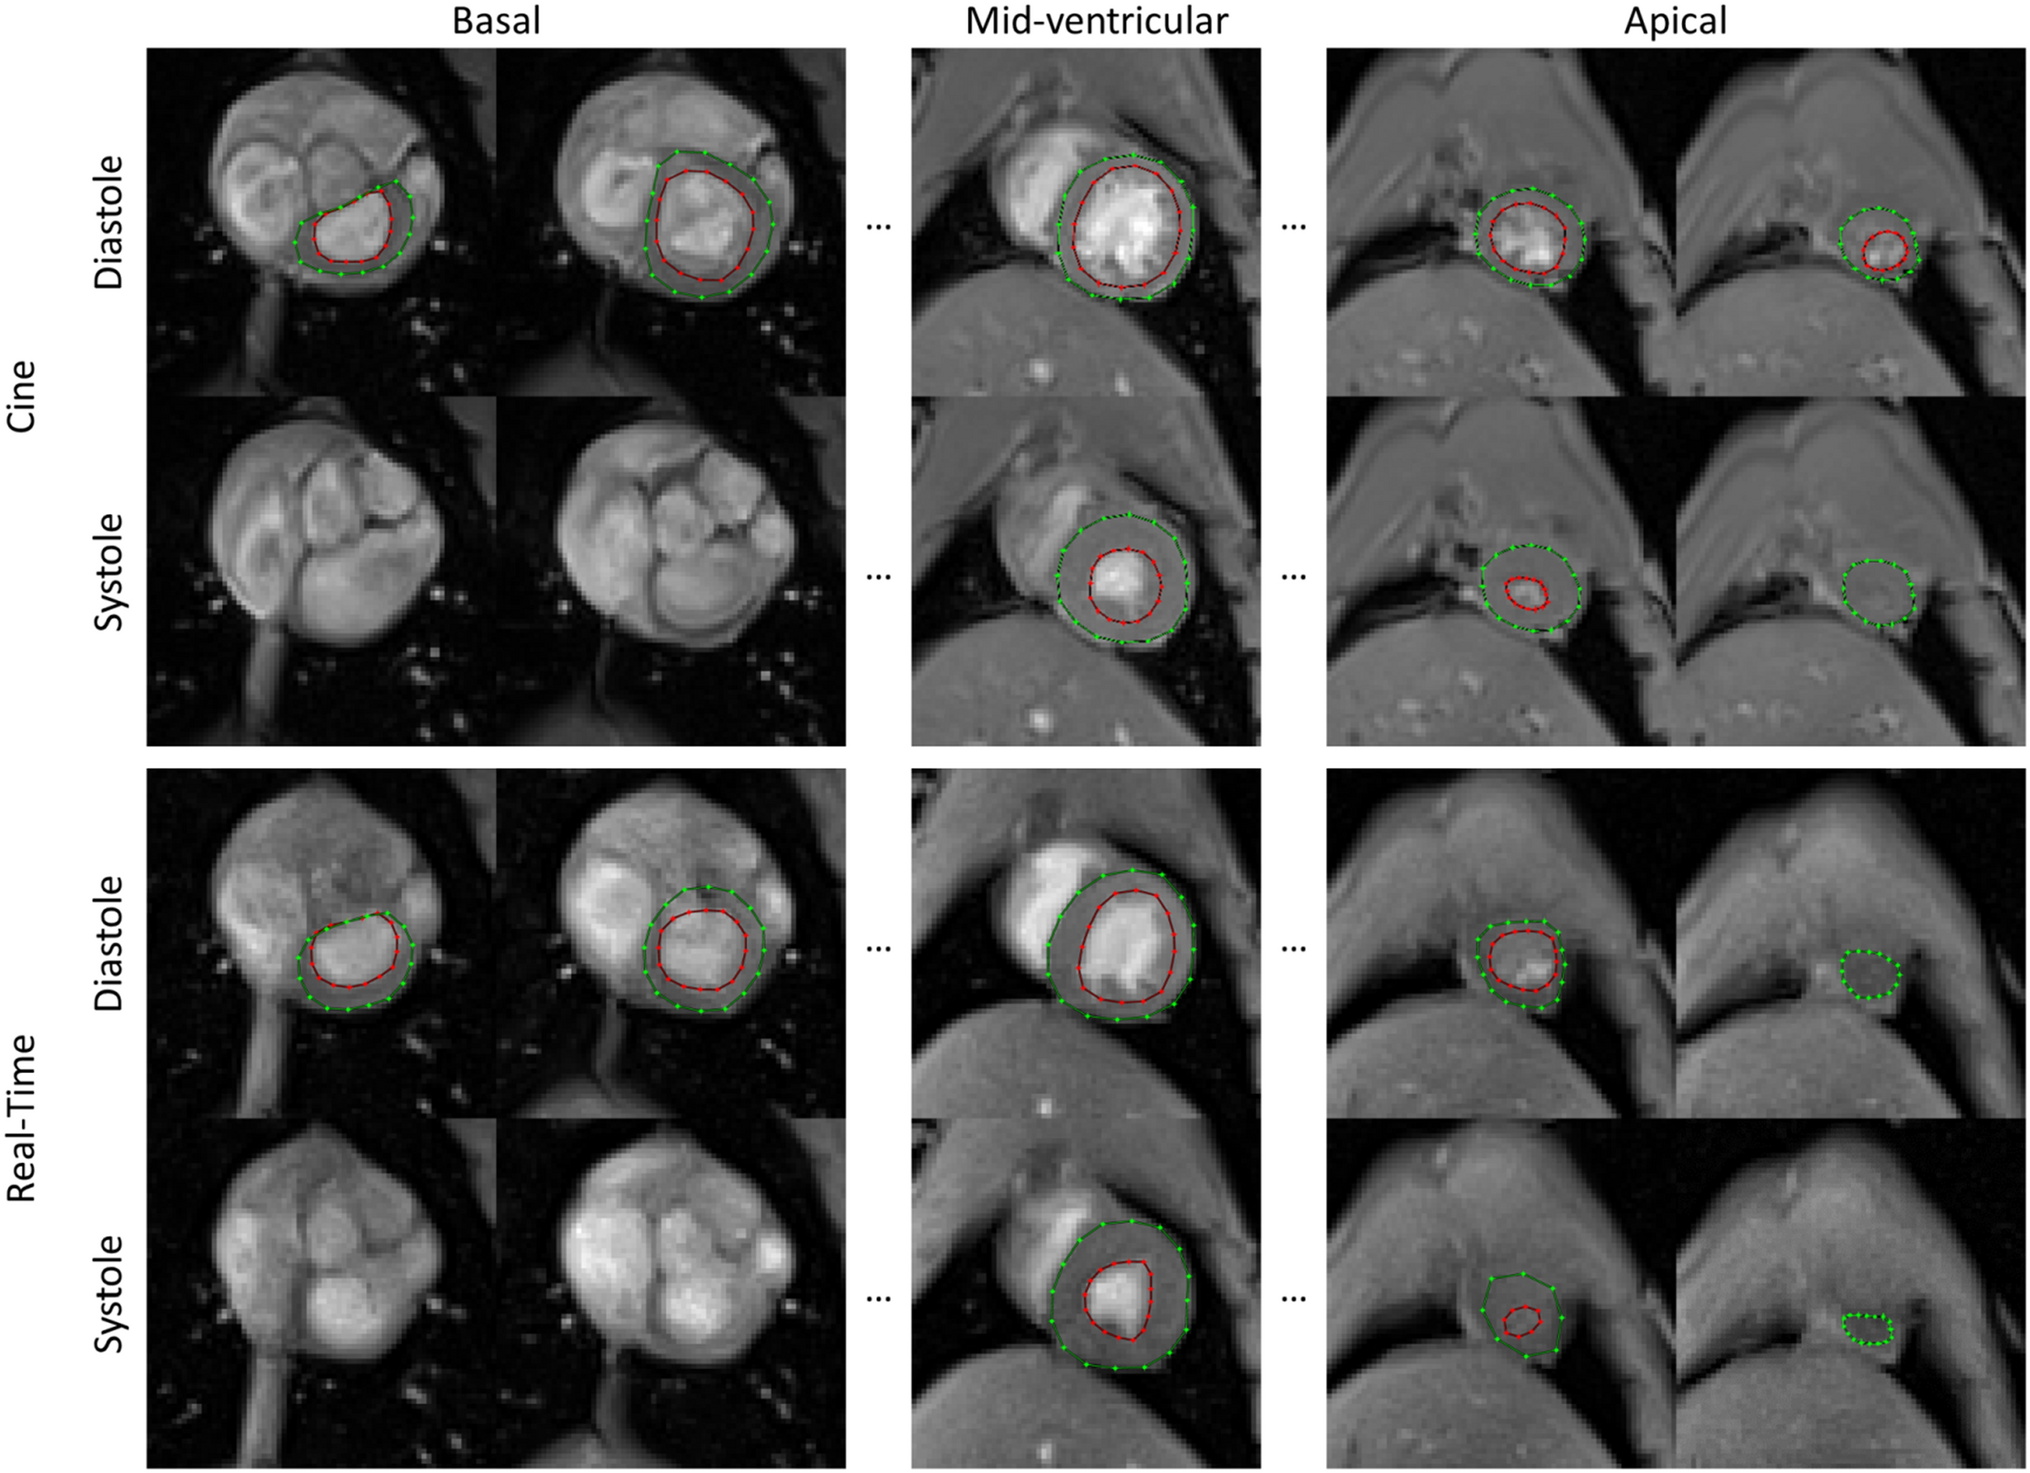 Comparison of cine and real-time cardiac MRI in rhesus macaques |  Scientific Reports